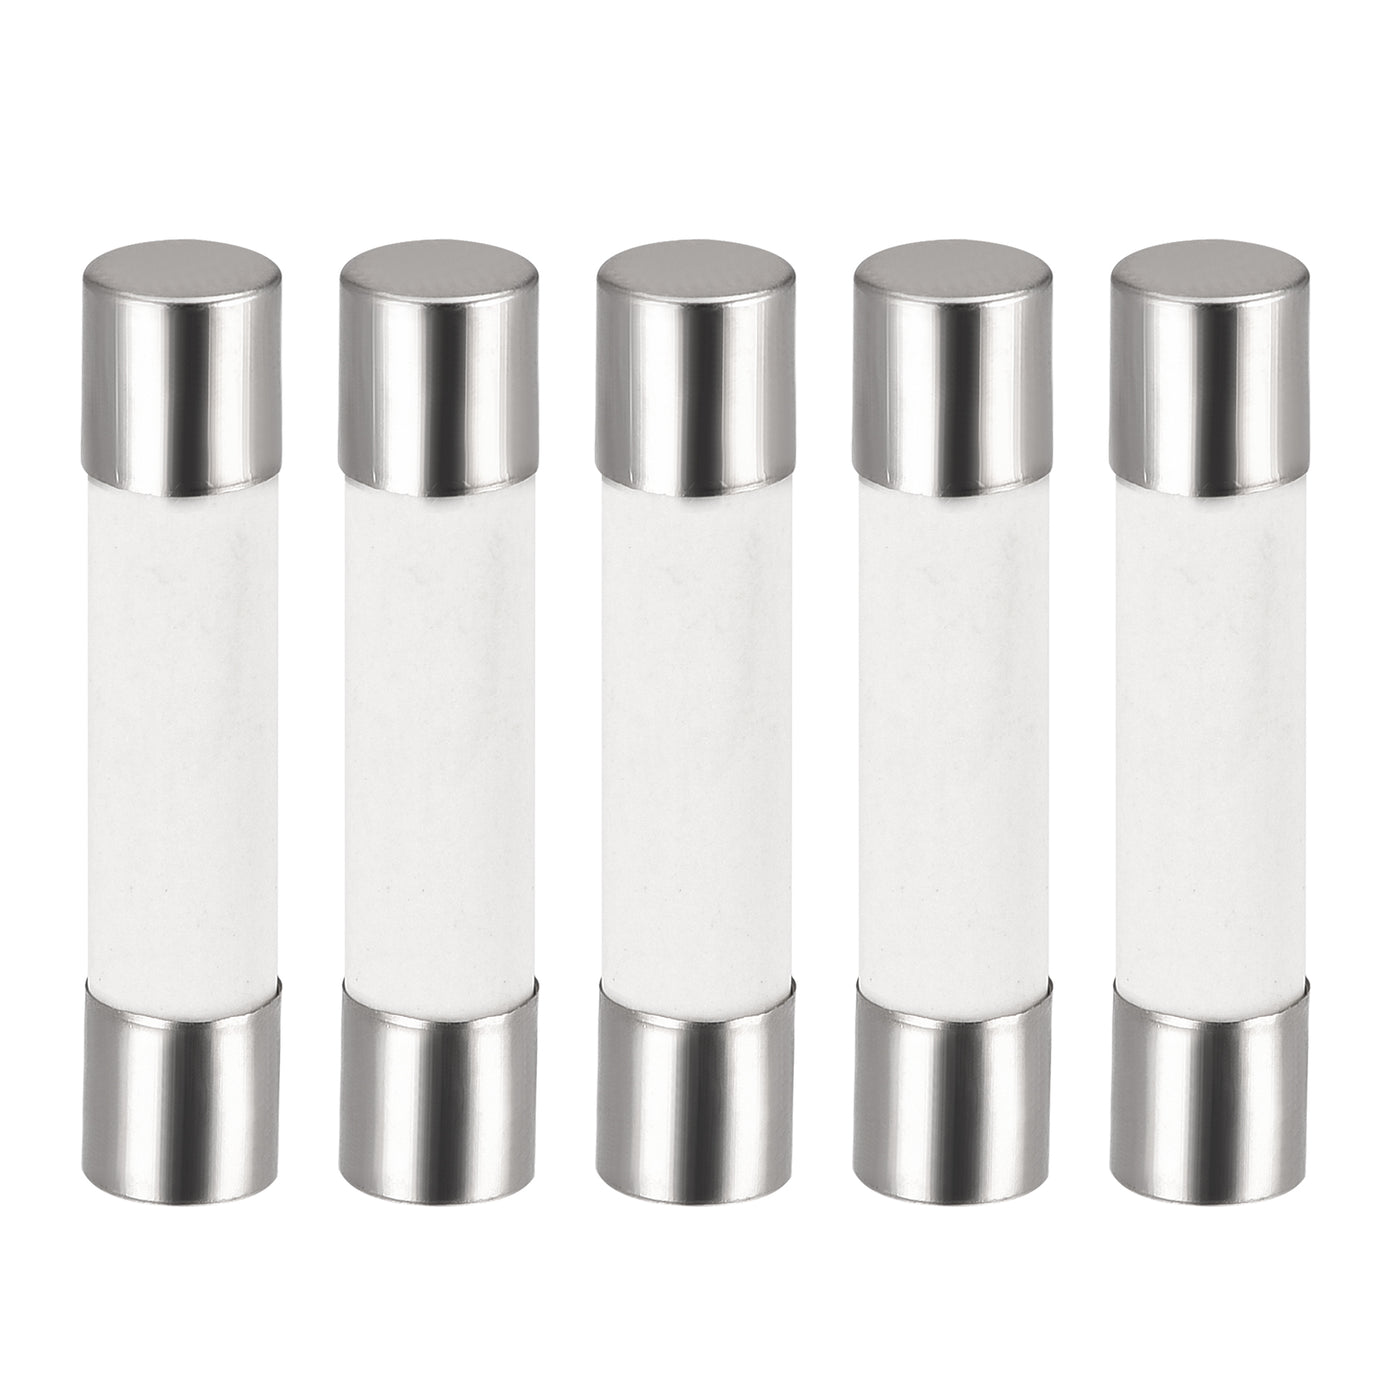 uxcell Uxcell Ceramic Cartridge Fuses 1A 250V 6x30mm Fast Blow for Energy Saving Lamp 5pcs